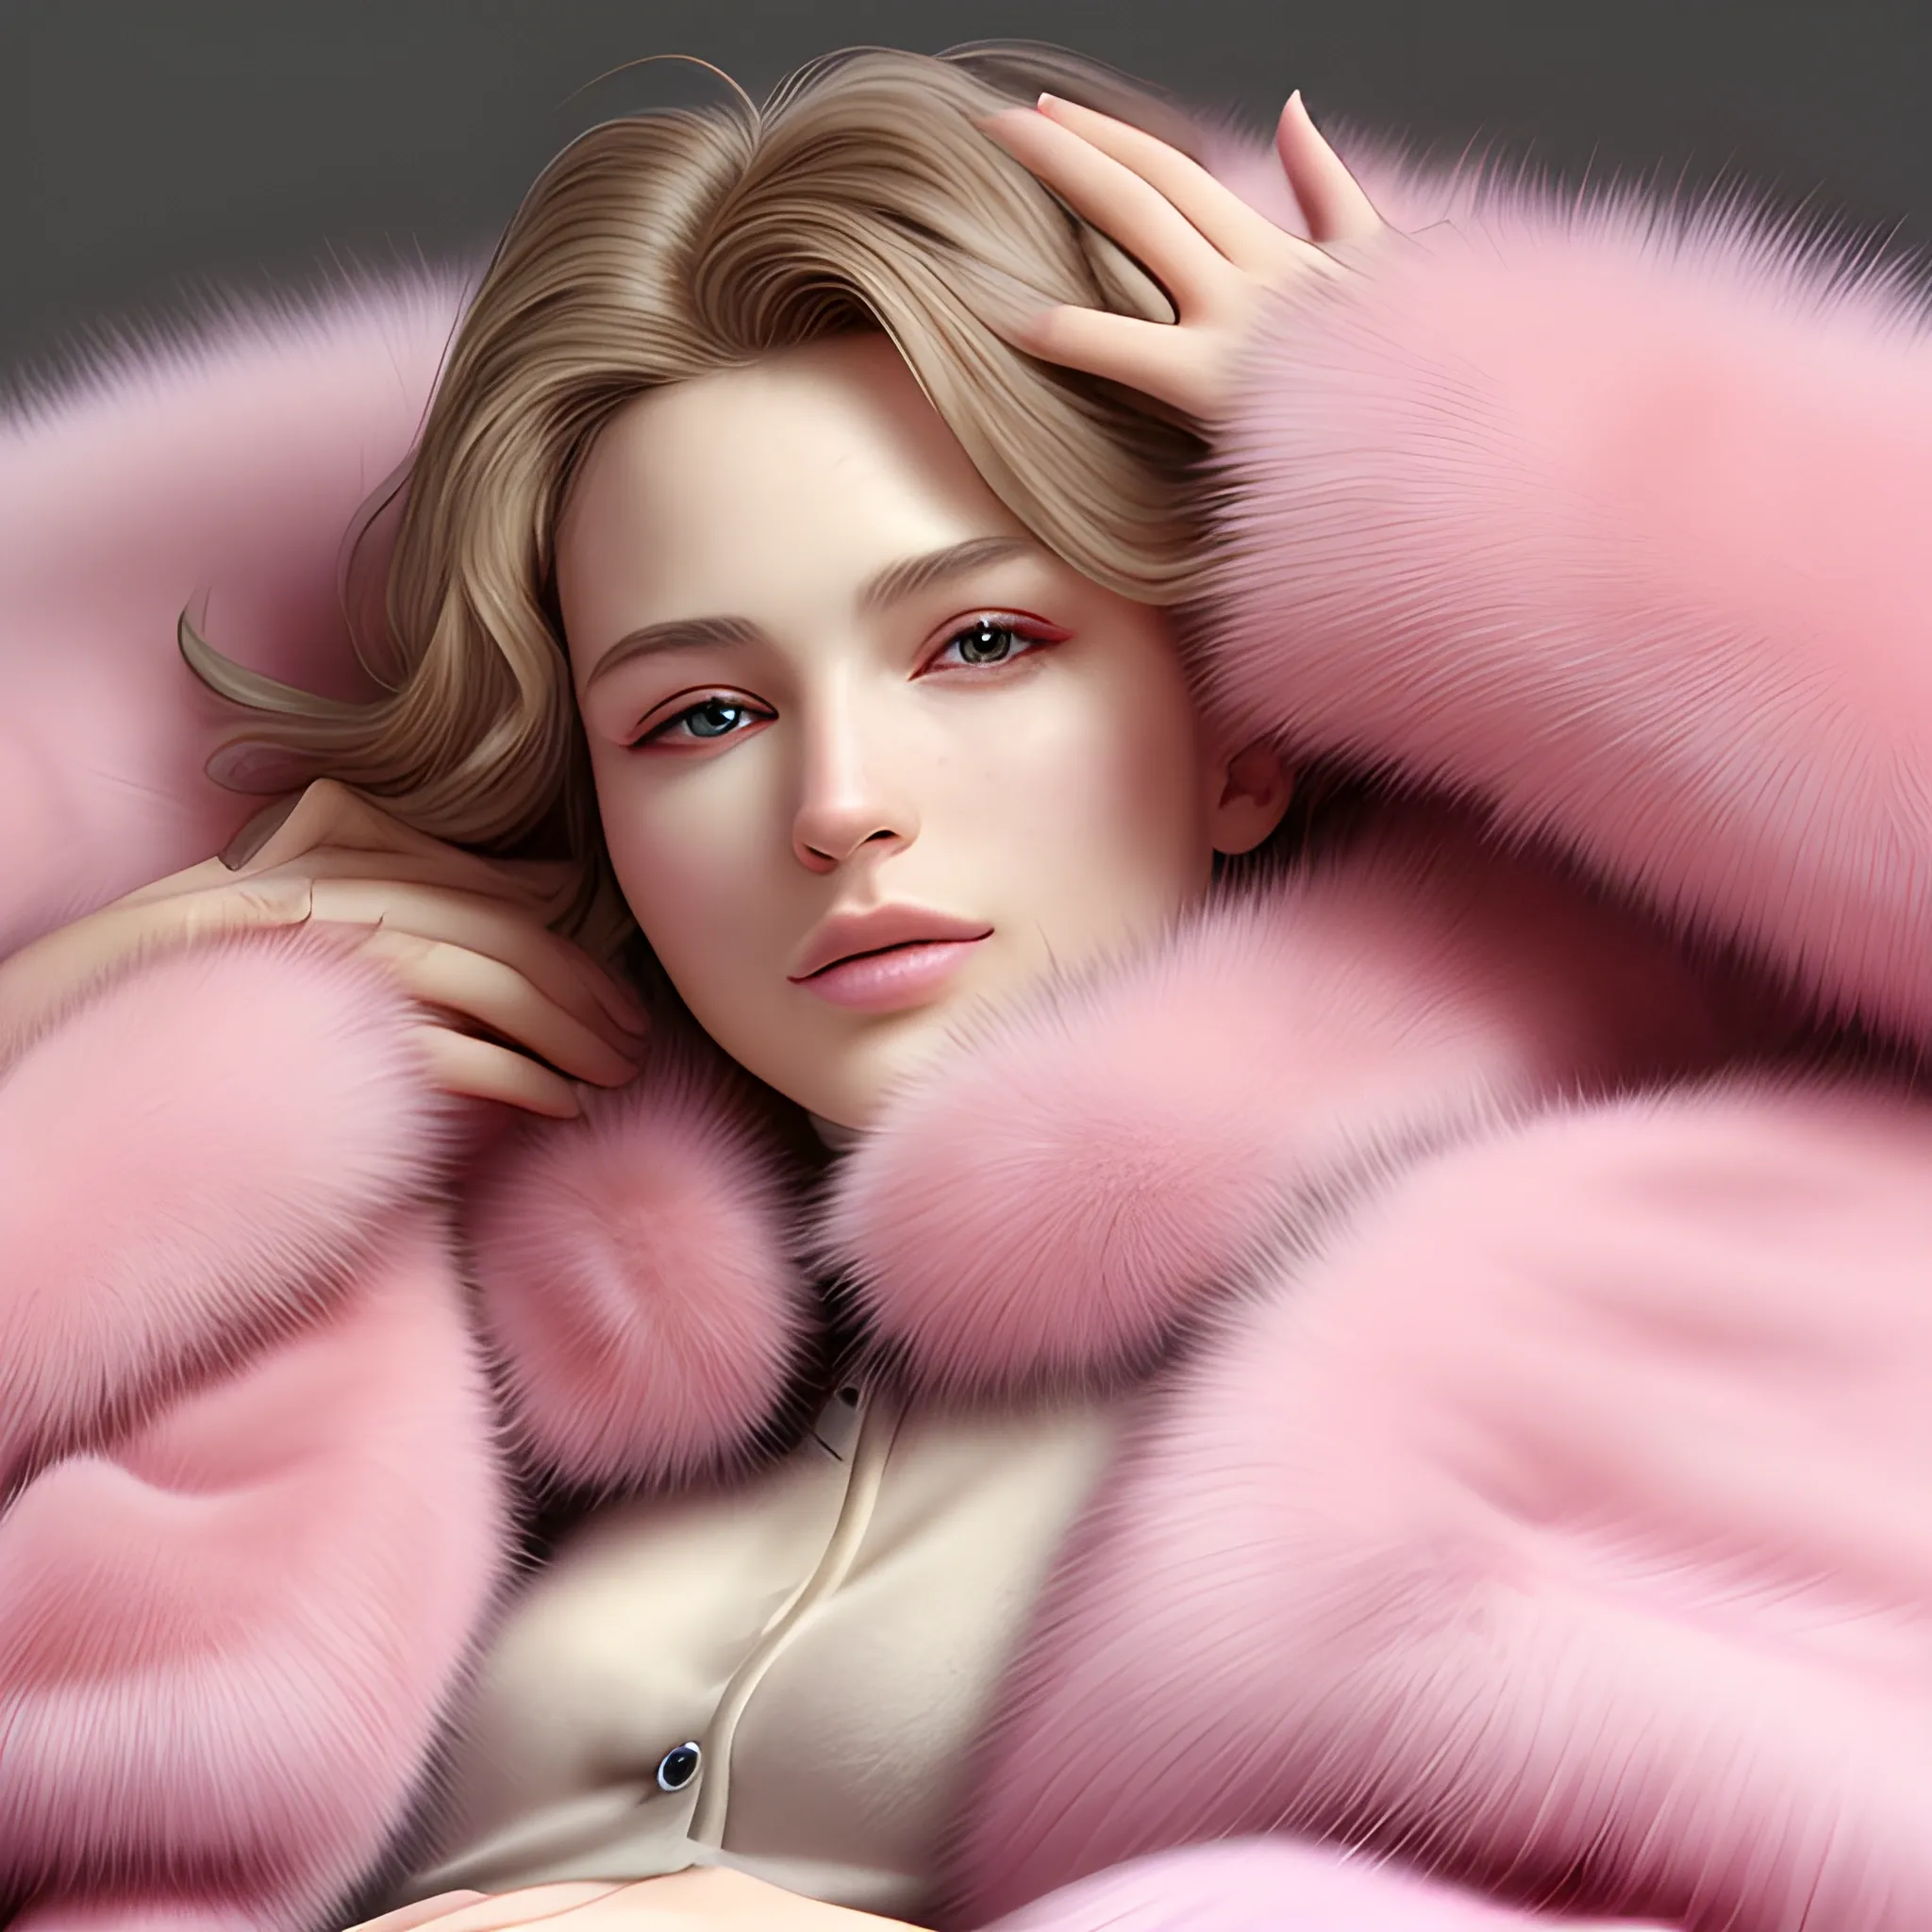 best quality, masterpiece, ultra high res, photorealistic, detailed skin, pink fur coat, lounging